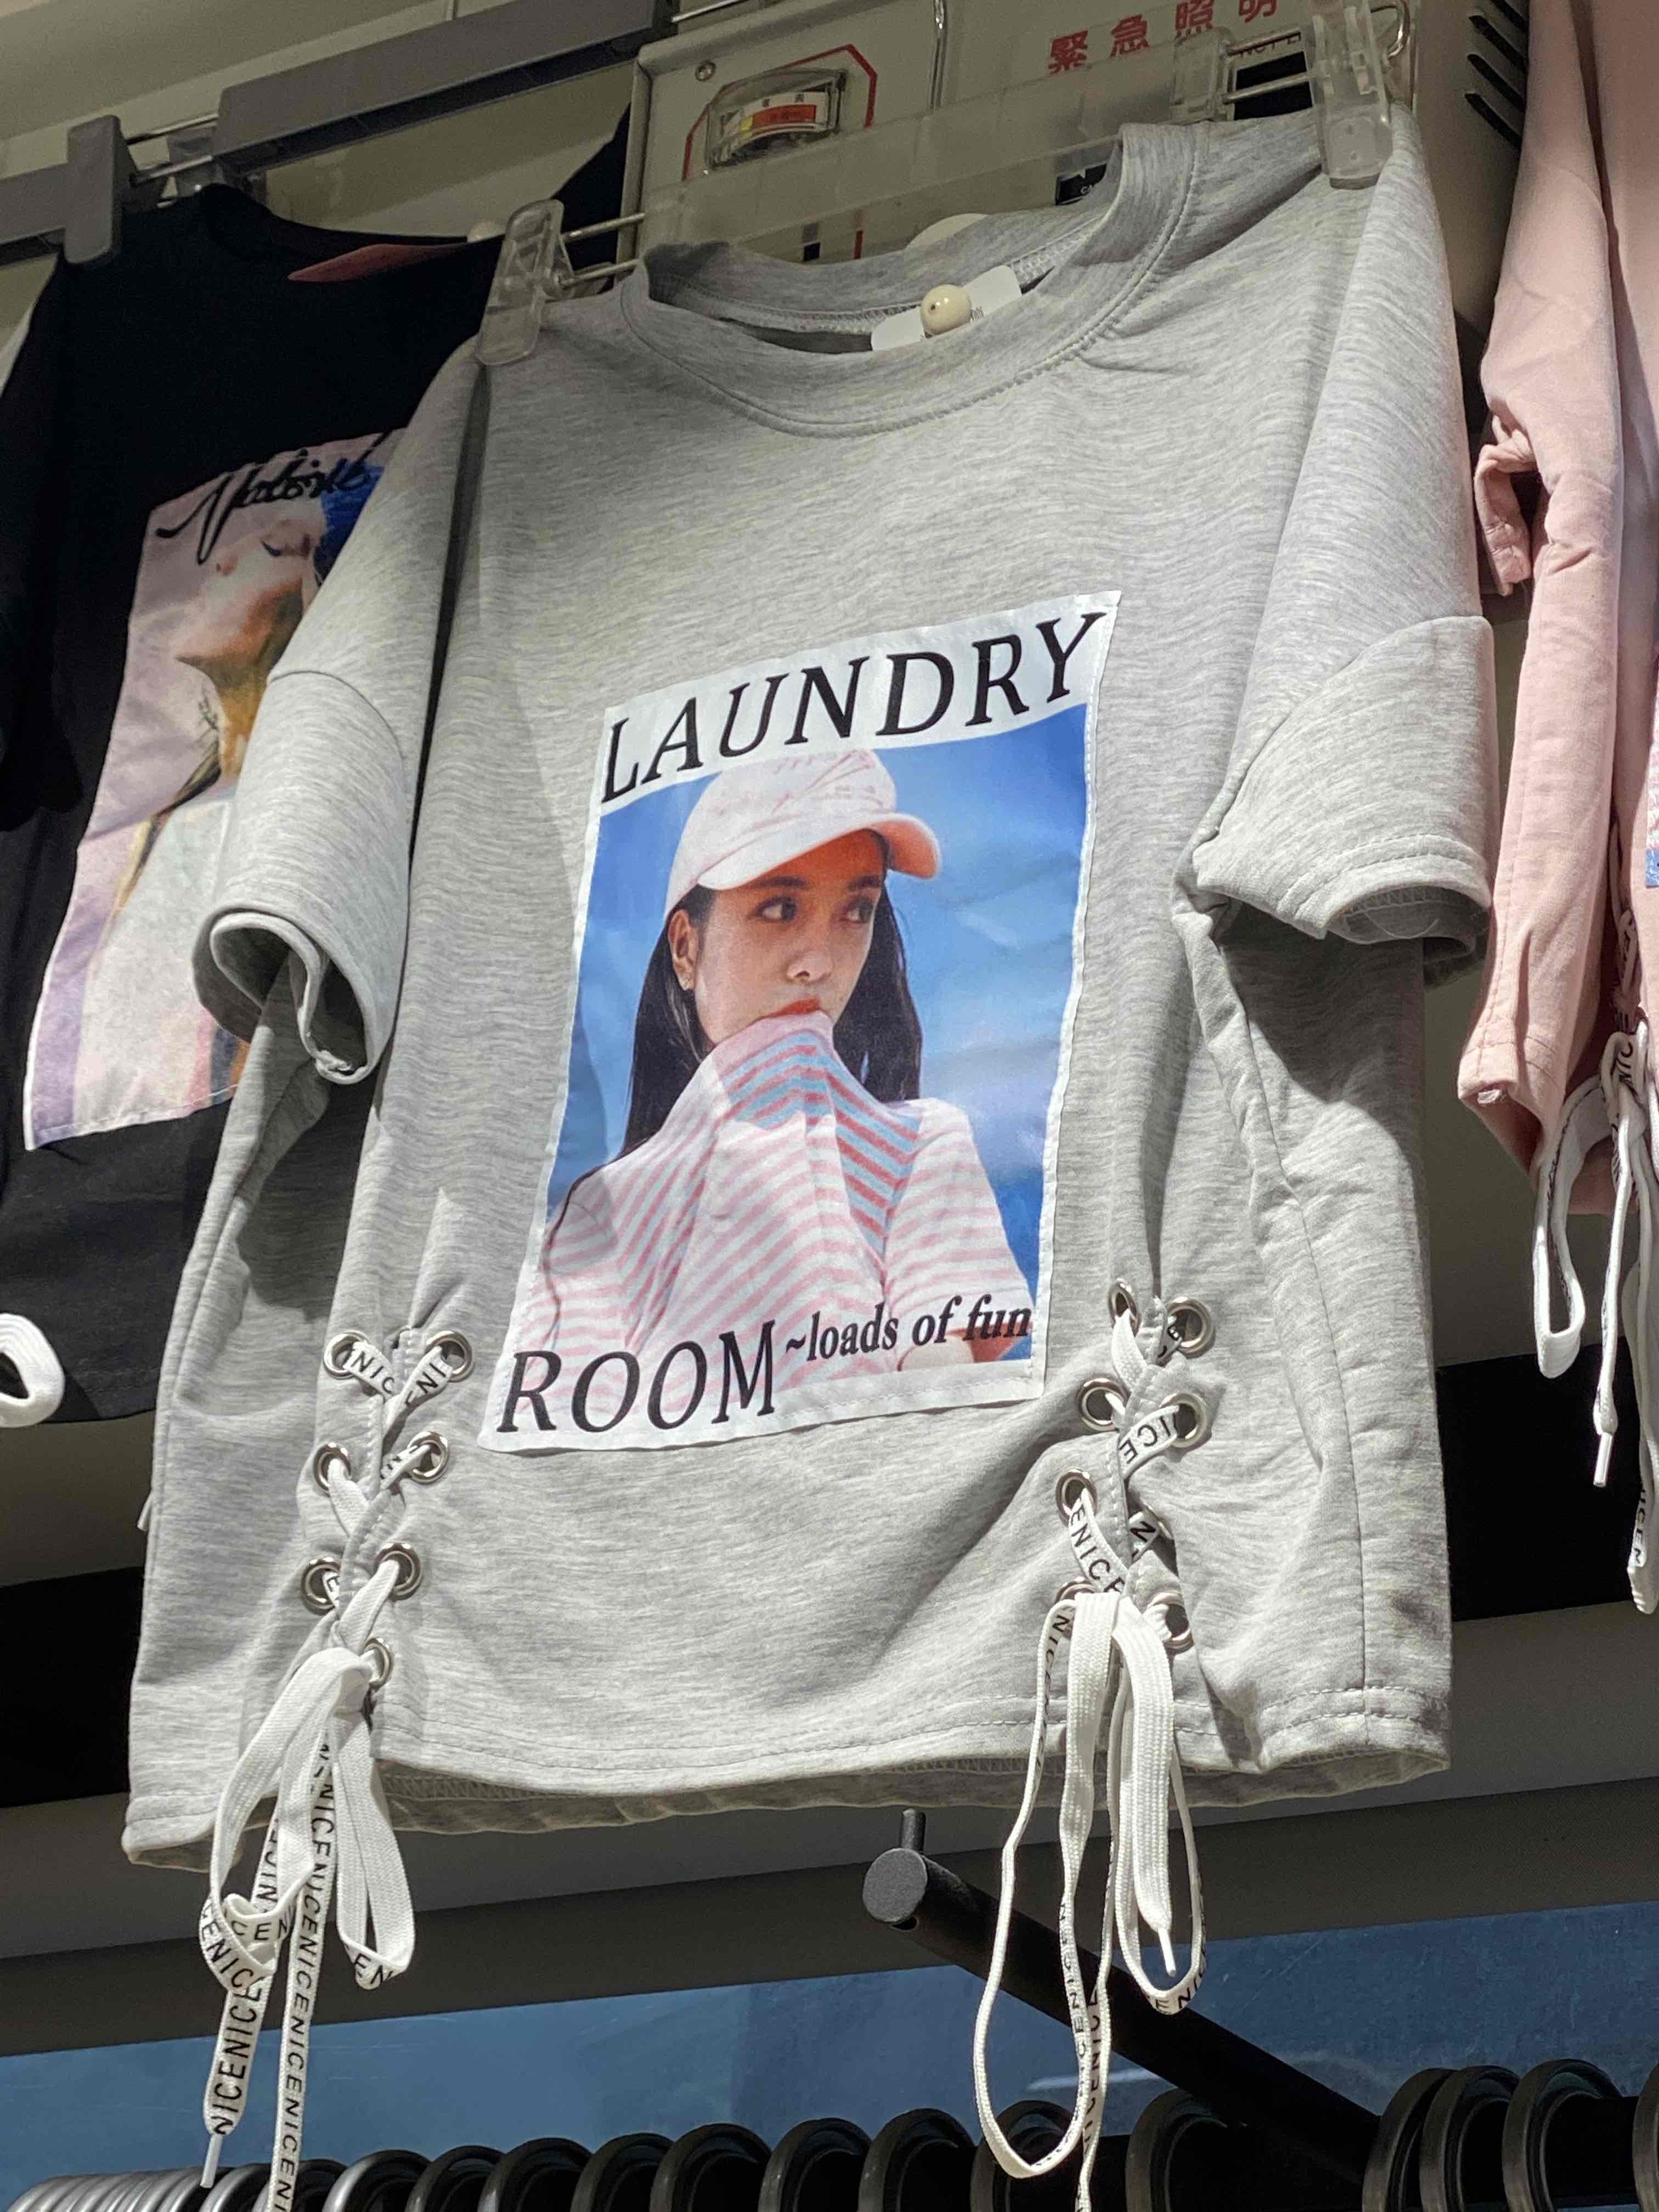 a shirt with a picture of a woman printed on it. The english text on the shirt says "Laundry Room ~loads of fun"